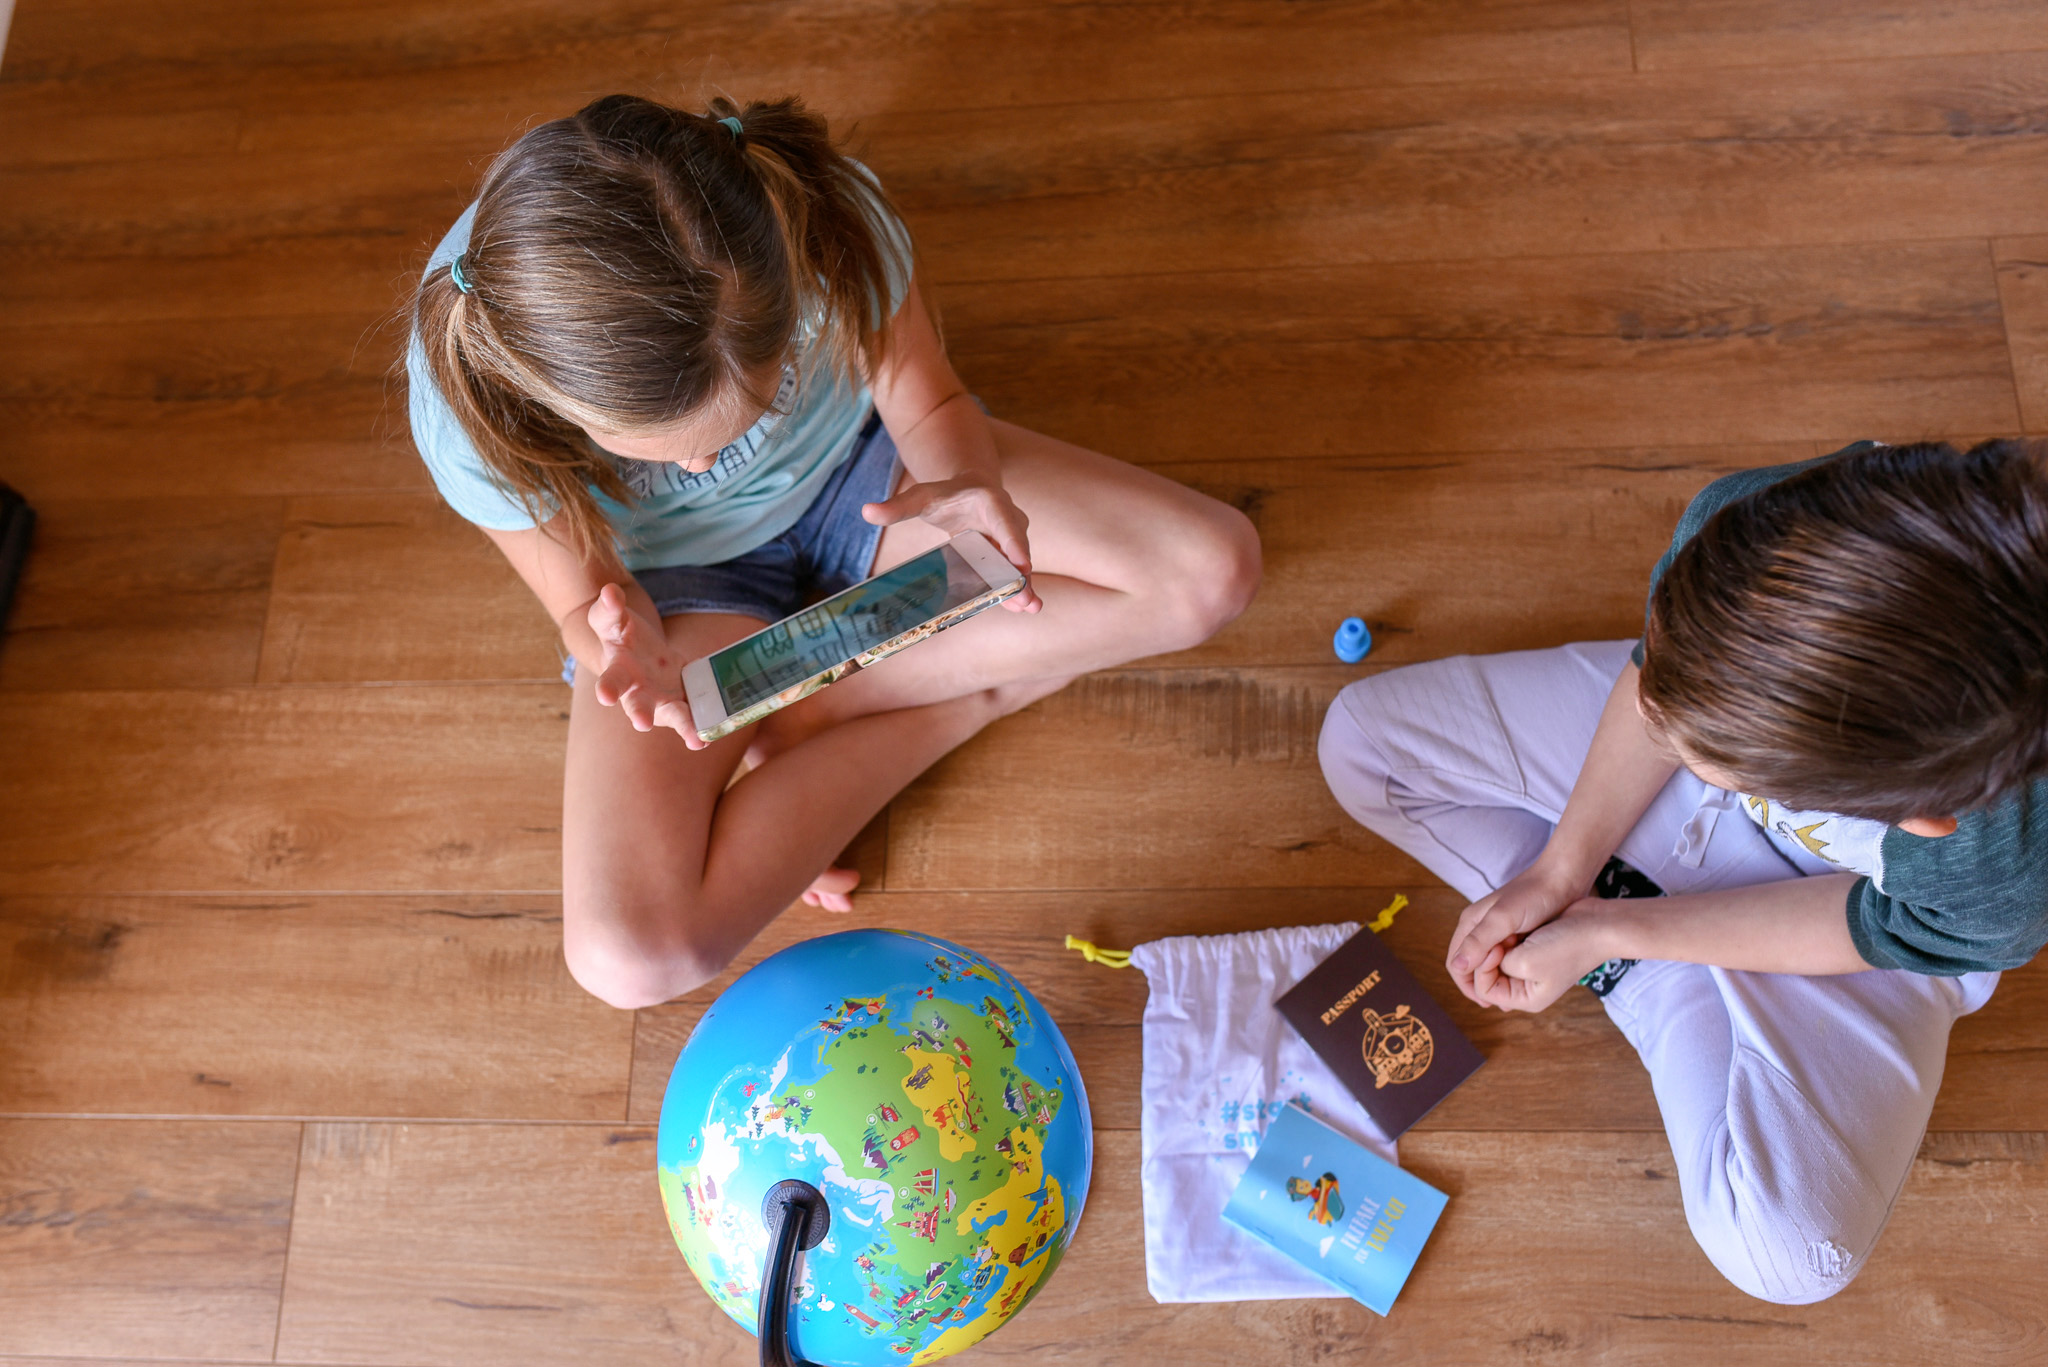 Orboot Globe  review - image shows two kids holding an ipad and learning about the world on the Orboot Globe